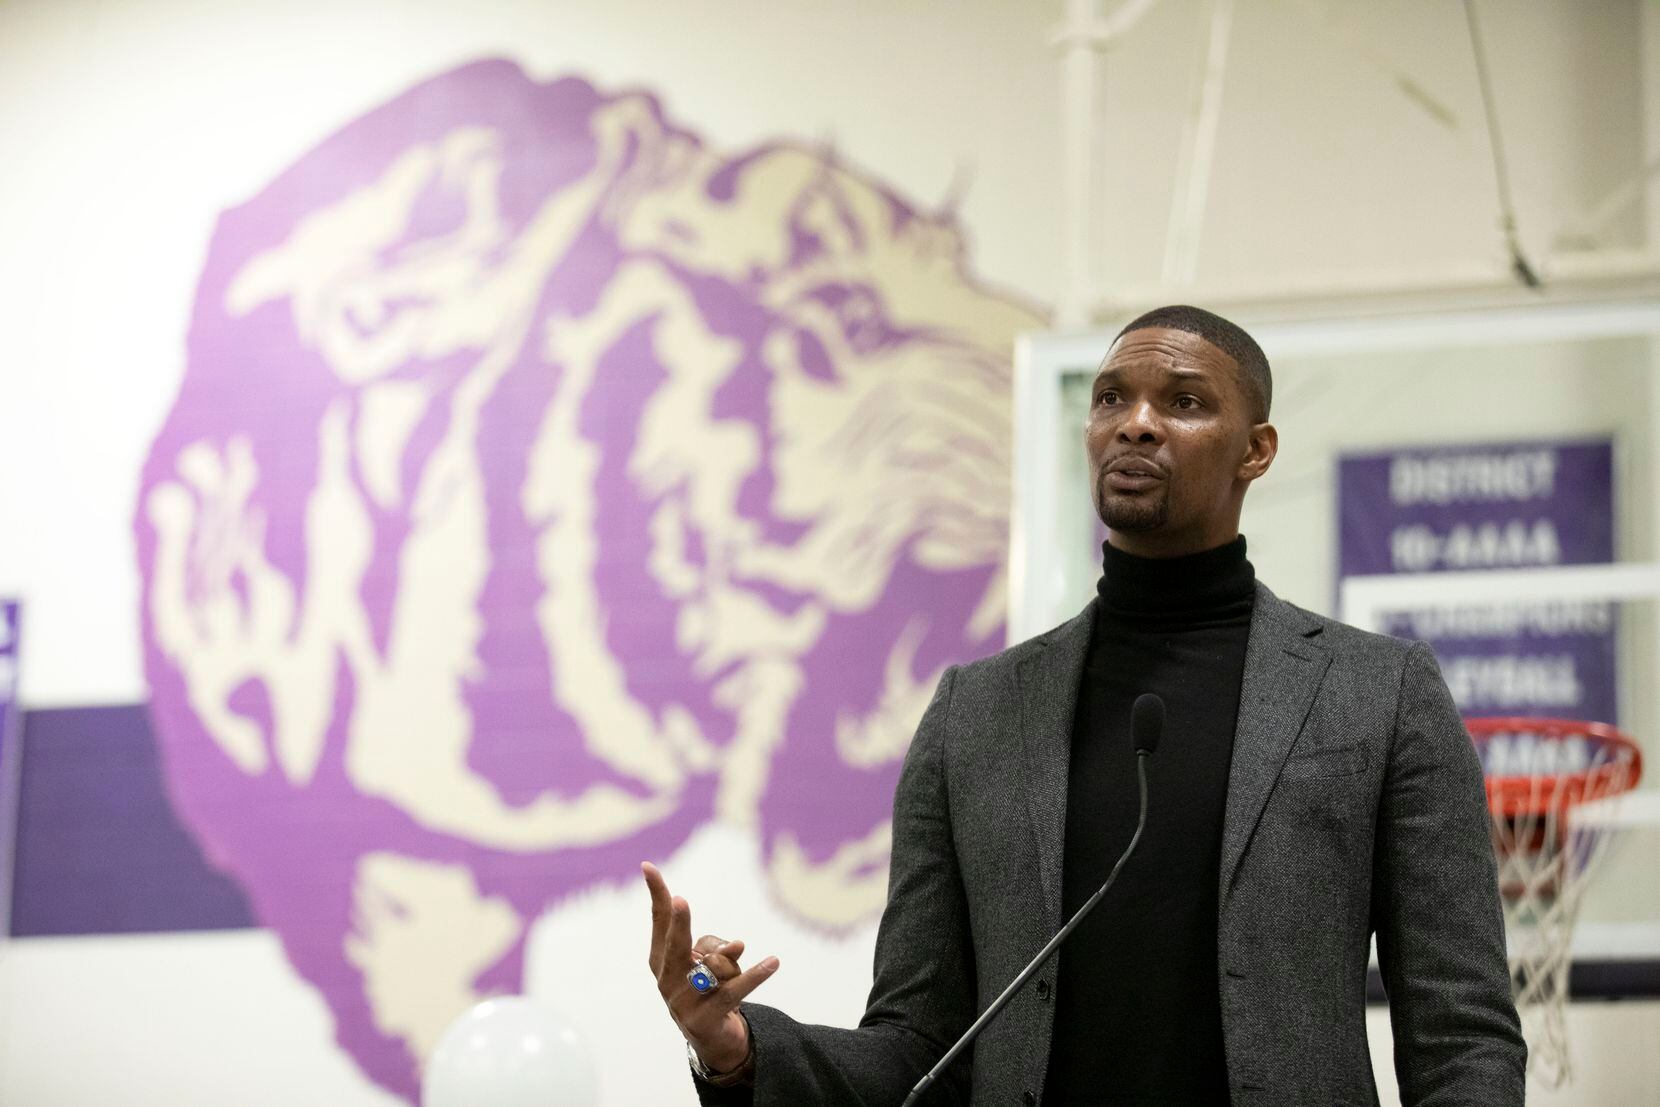 NBA Hall-of-Famer and Dallas native Chris Bosh speaks at his alma mater, Lincoln High School...